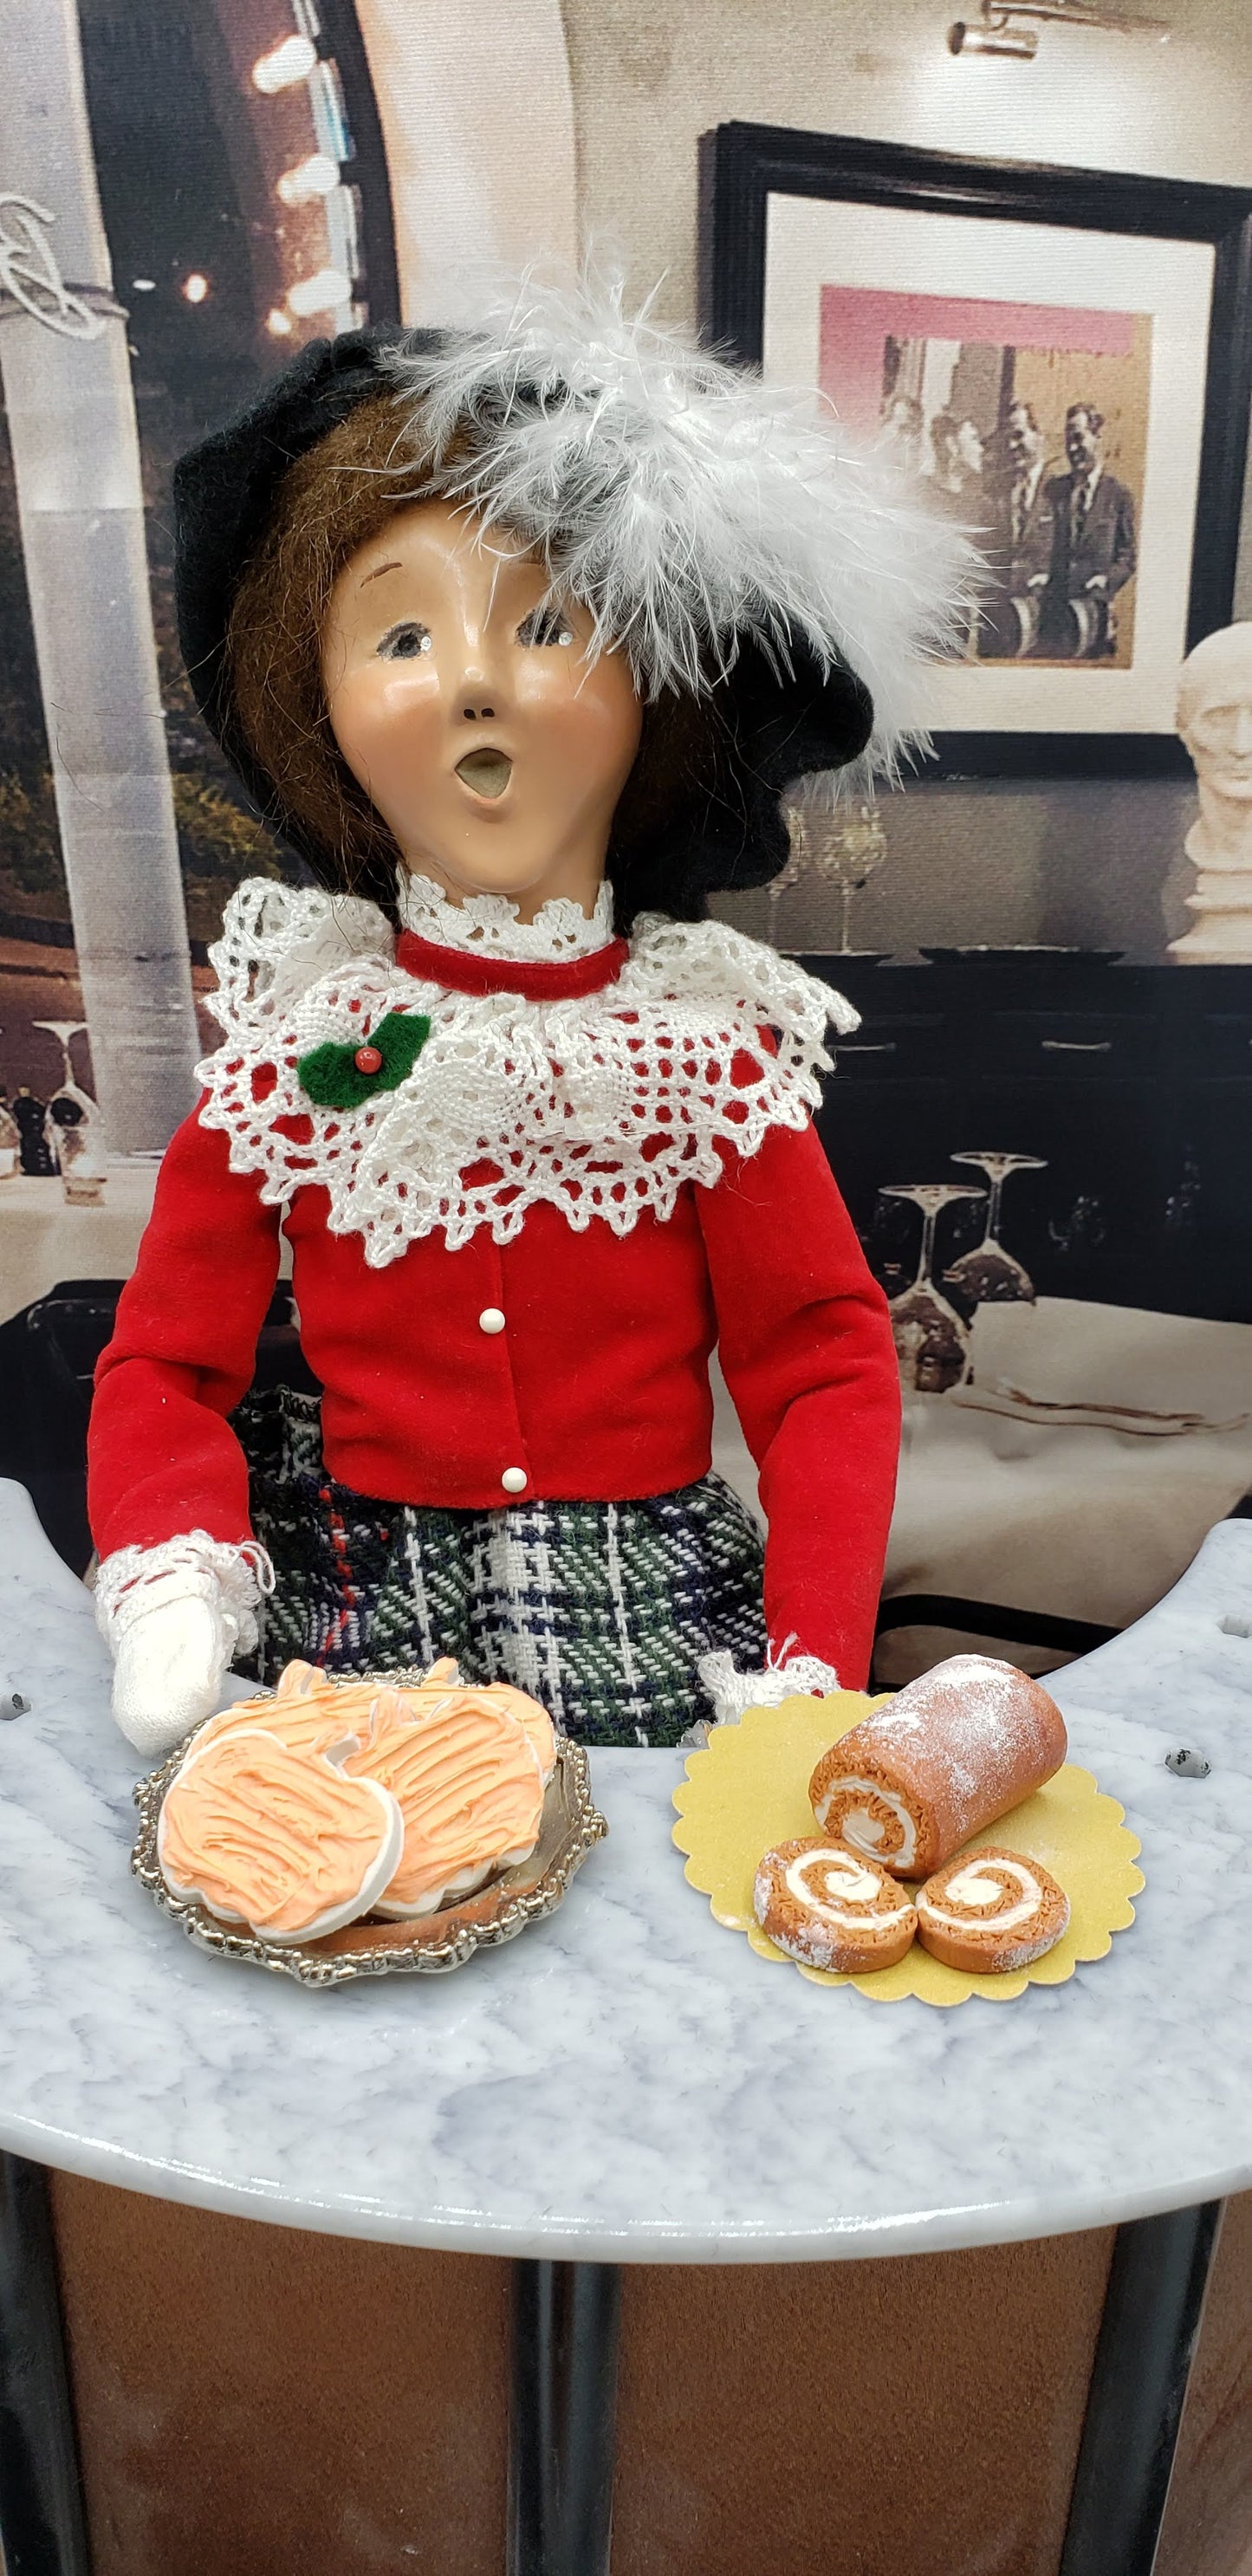 byers-choice-doll-with-cookies